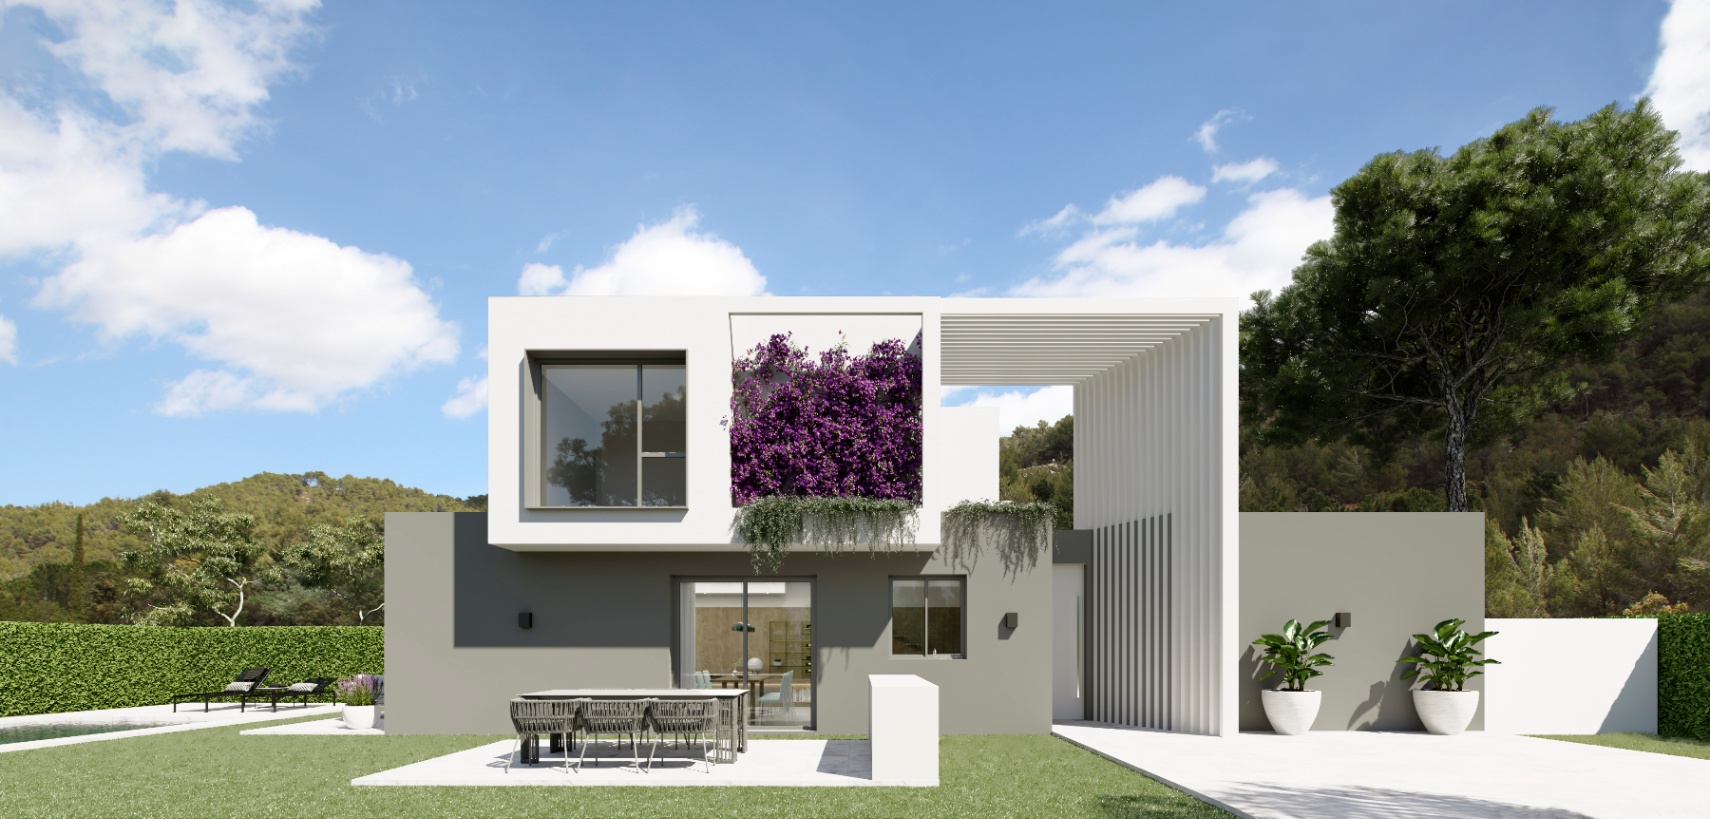 FOR SALE 21 DETACHED VILLAS WITH GARDEN AND POOL IN ALICANTE